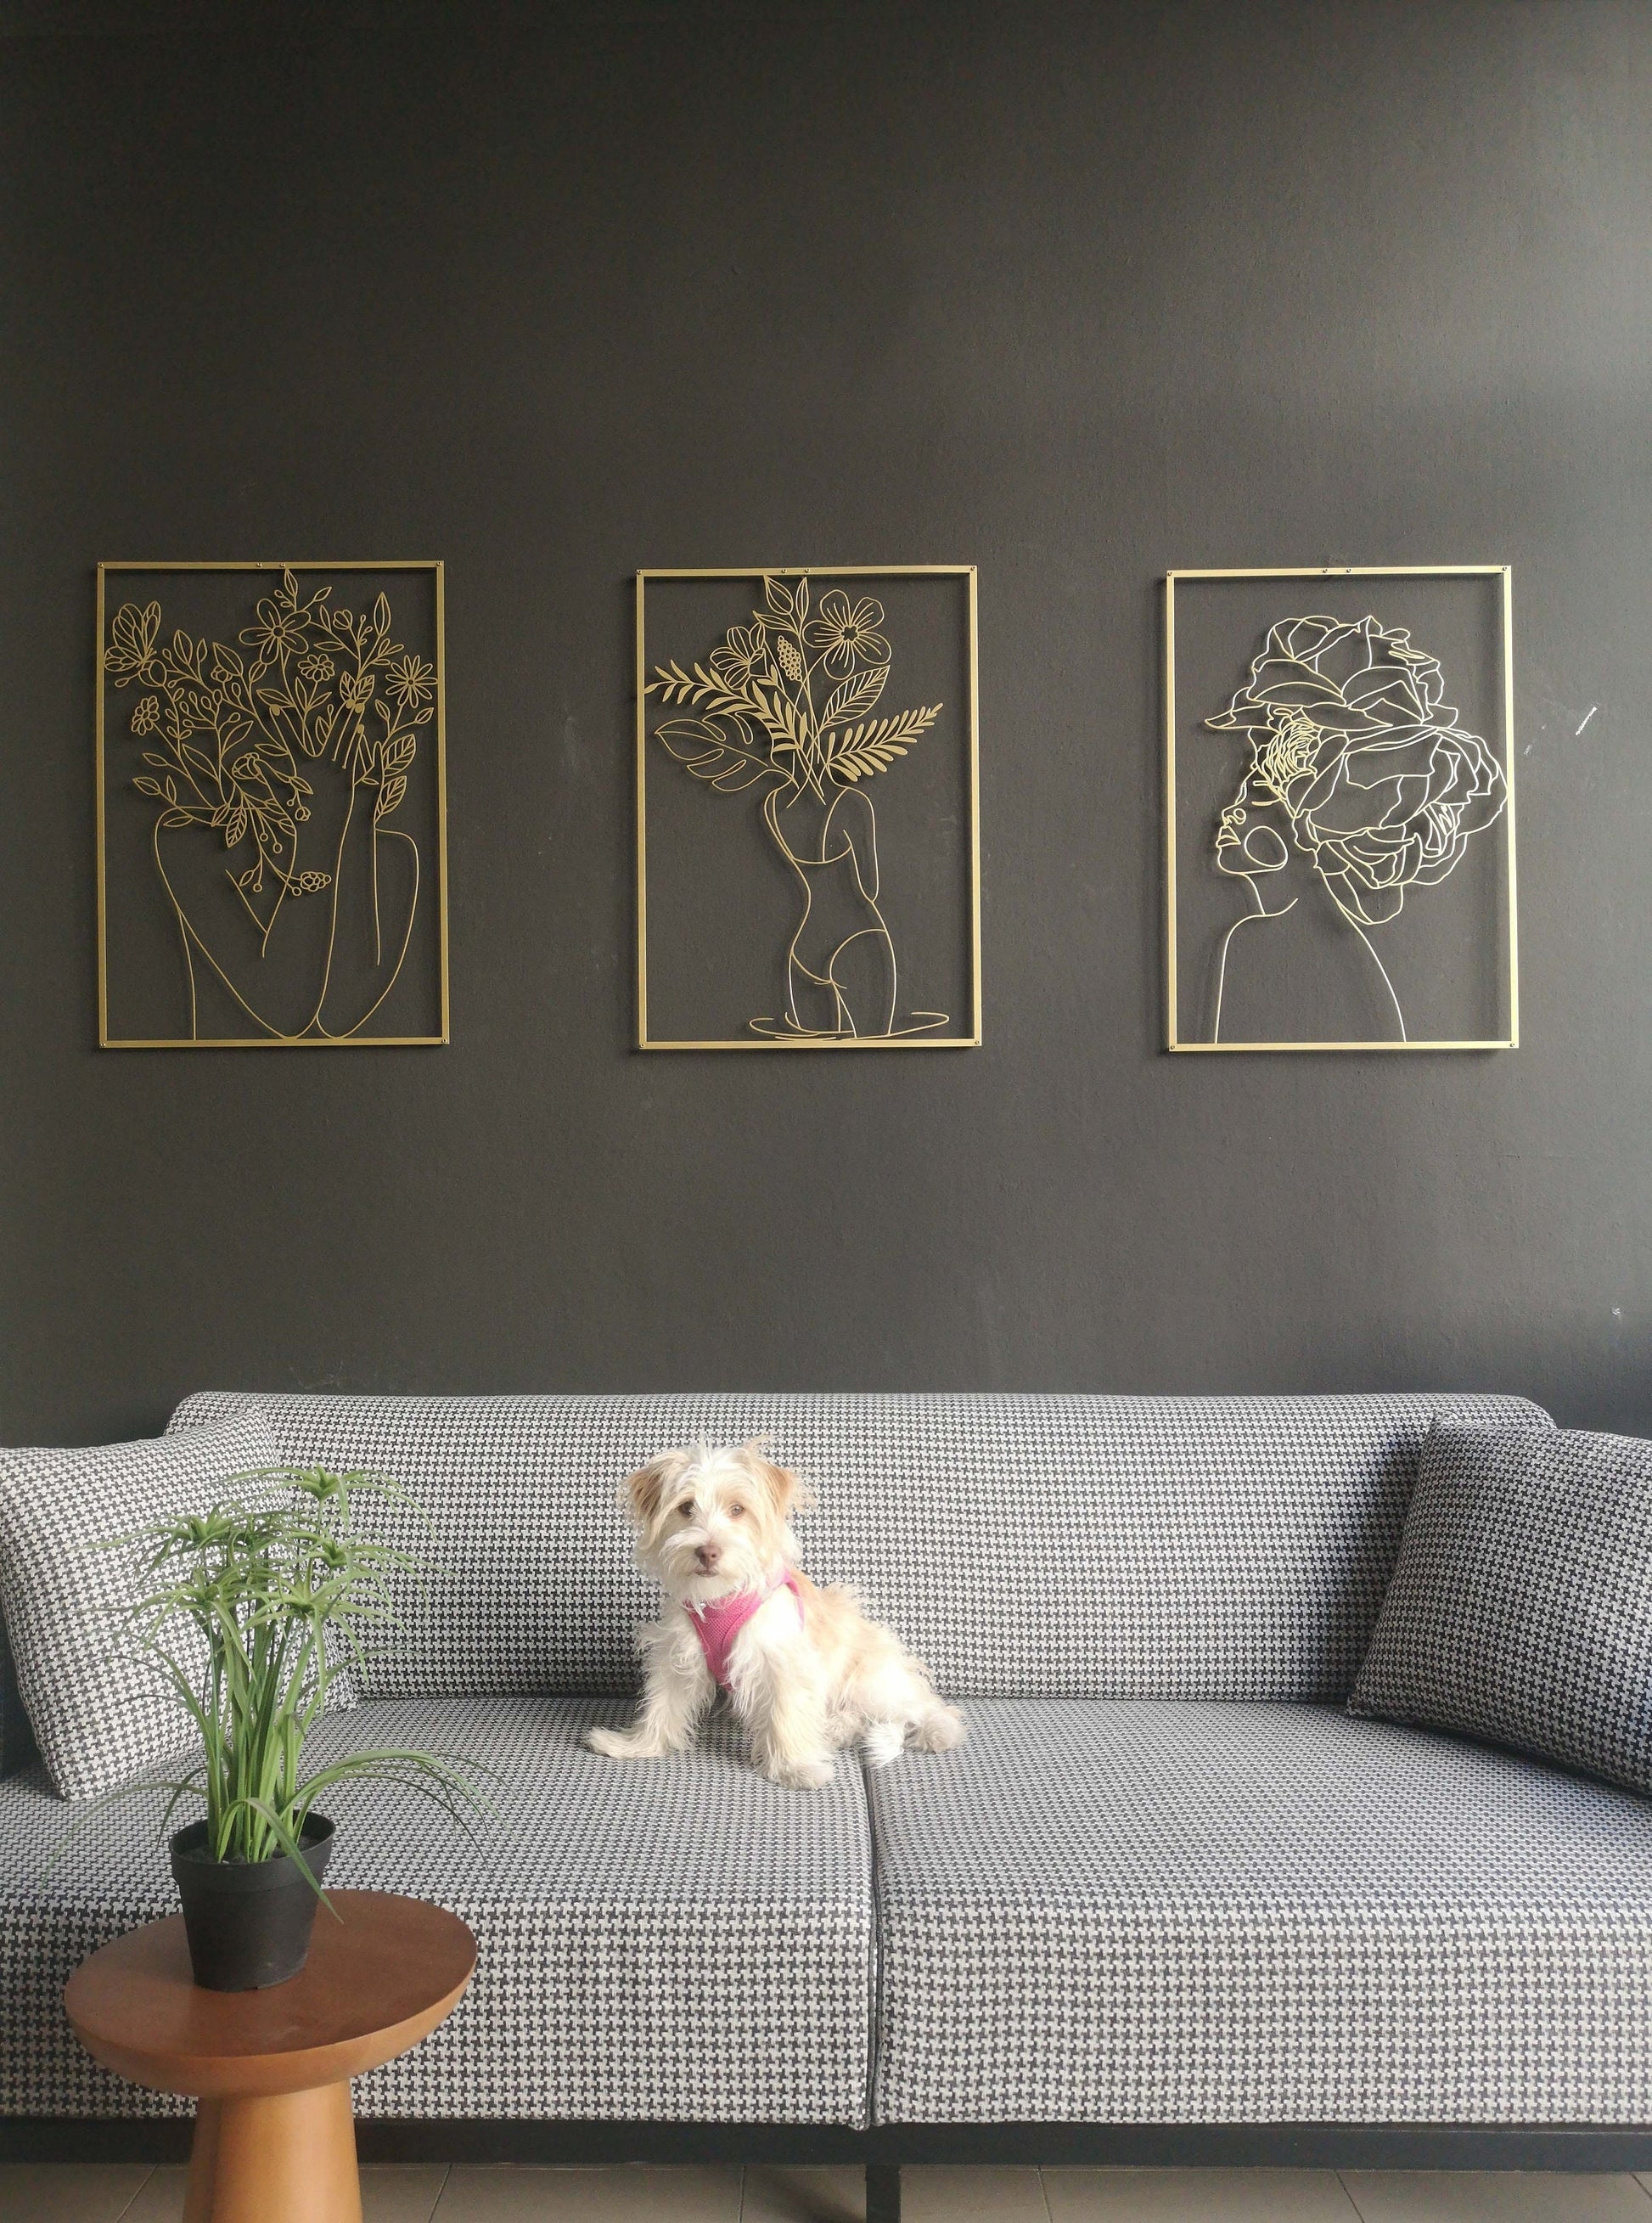 Woman Body Art Set, Gold Metal Wall Decor, Above Bed Decor, Above Couch Art, Unique Home Decor, Large Wall ArtGallery Wall Decor, - BlackIvyCraft